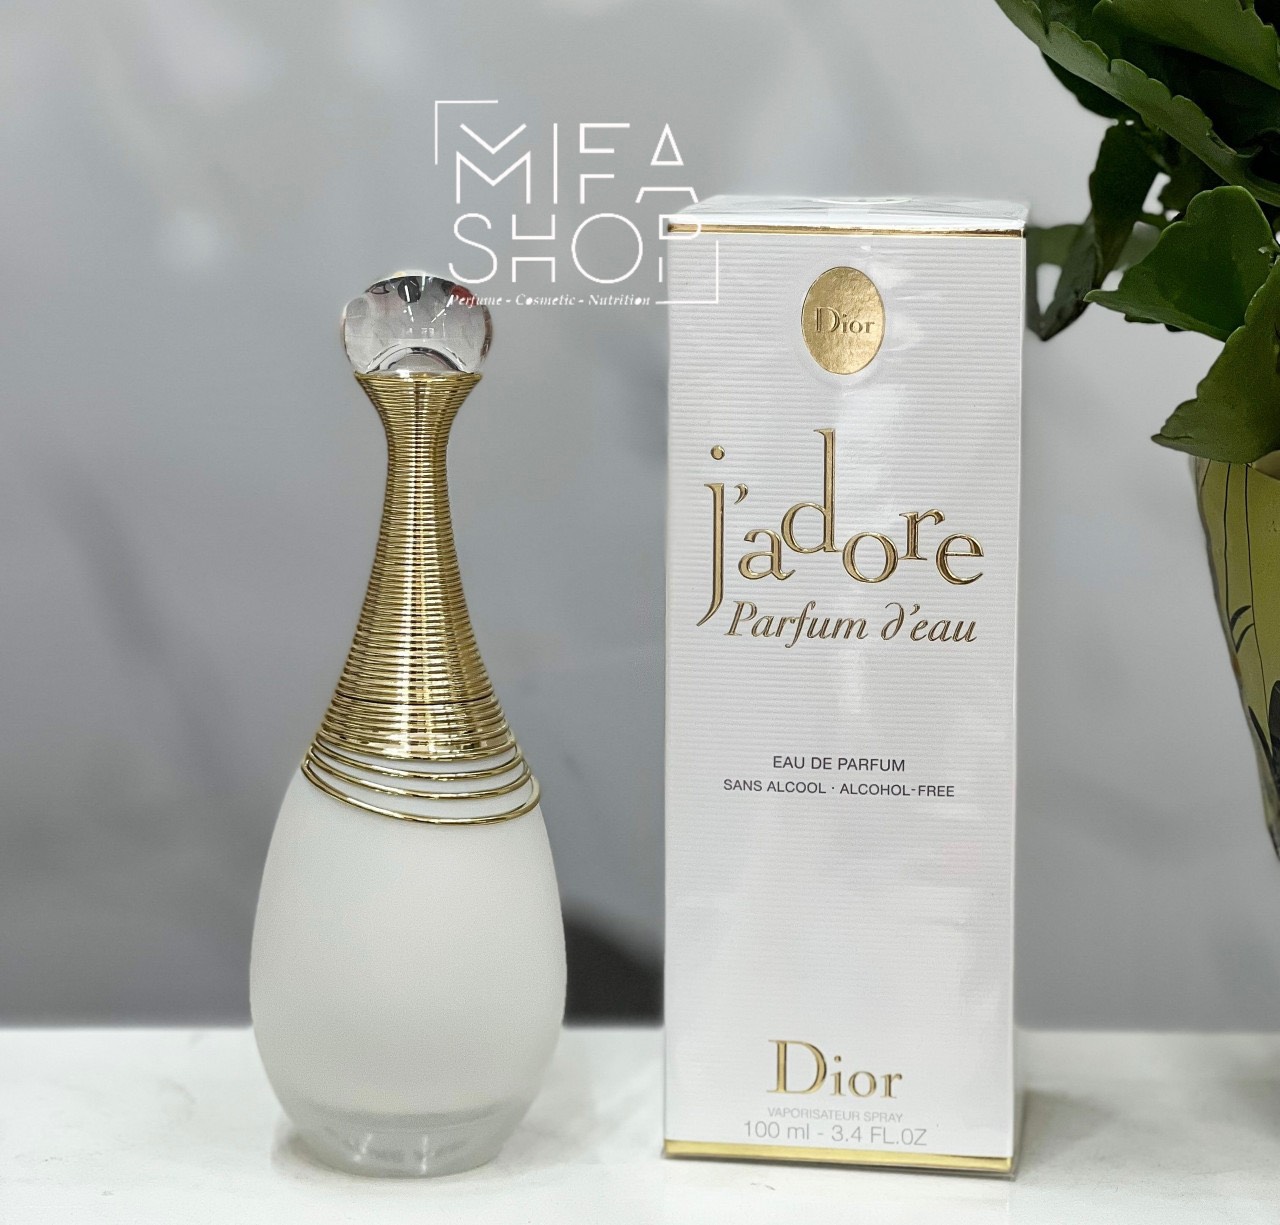 Nước Hoa Dior Jadore EDP Minisize 5ml  Mint Cosmetics  Save The Best For  You